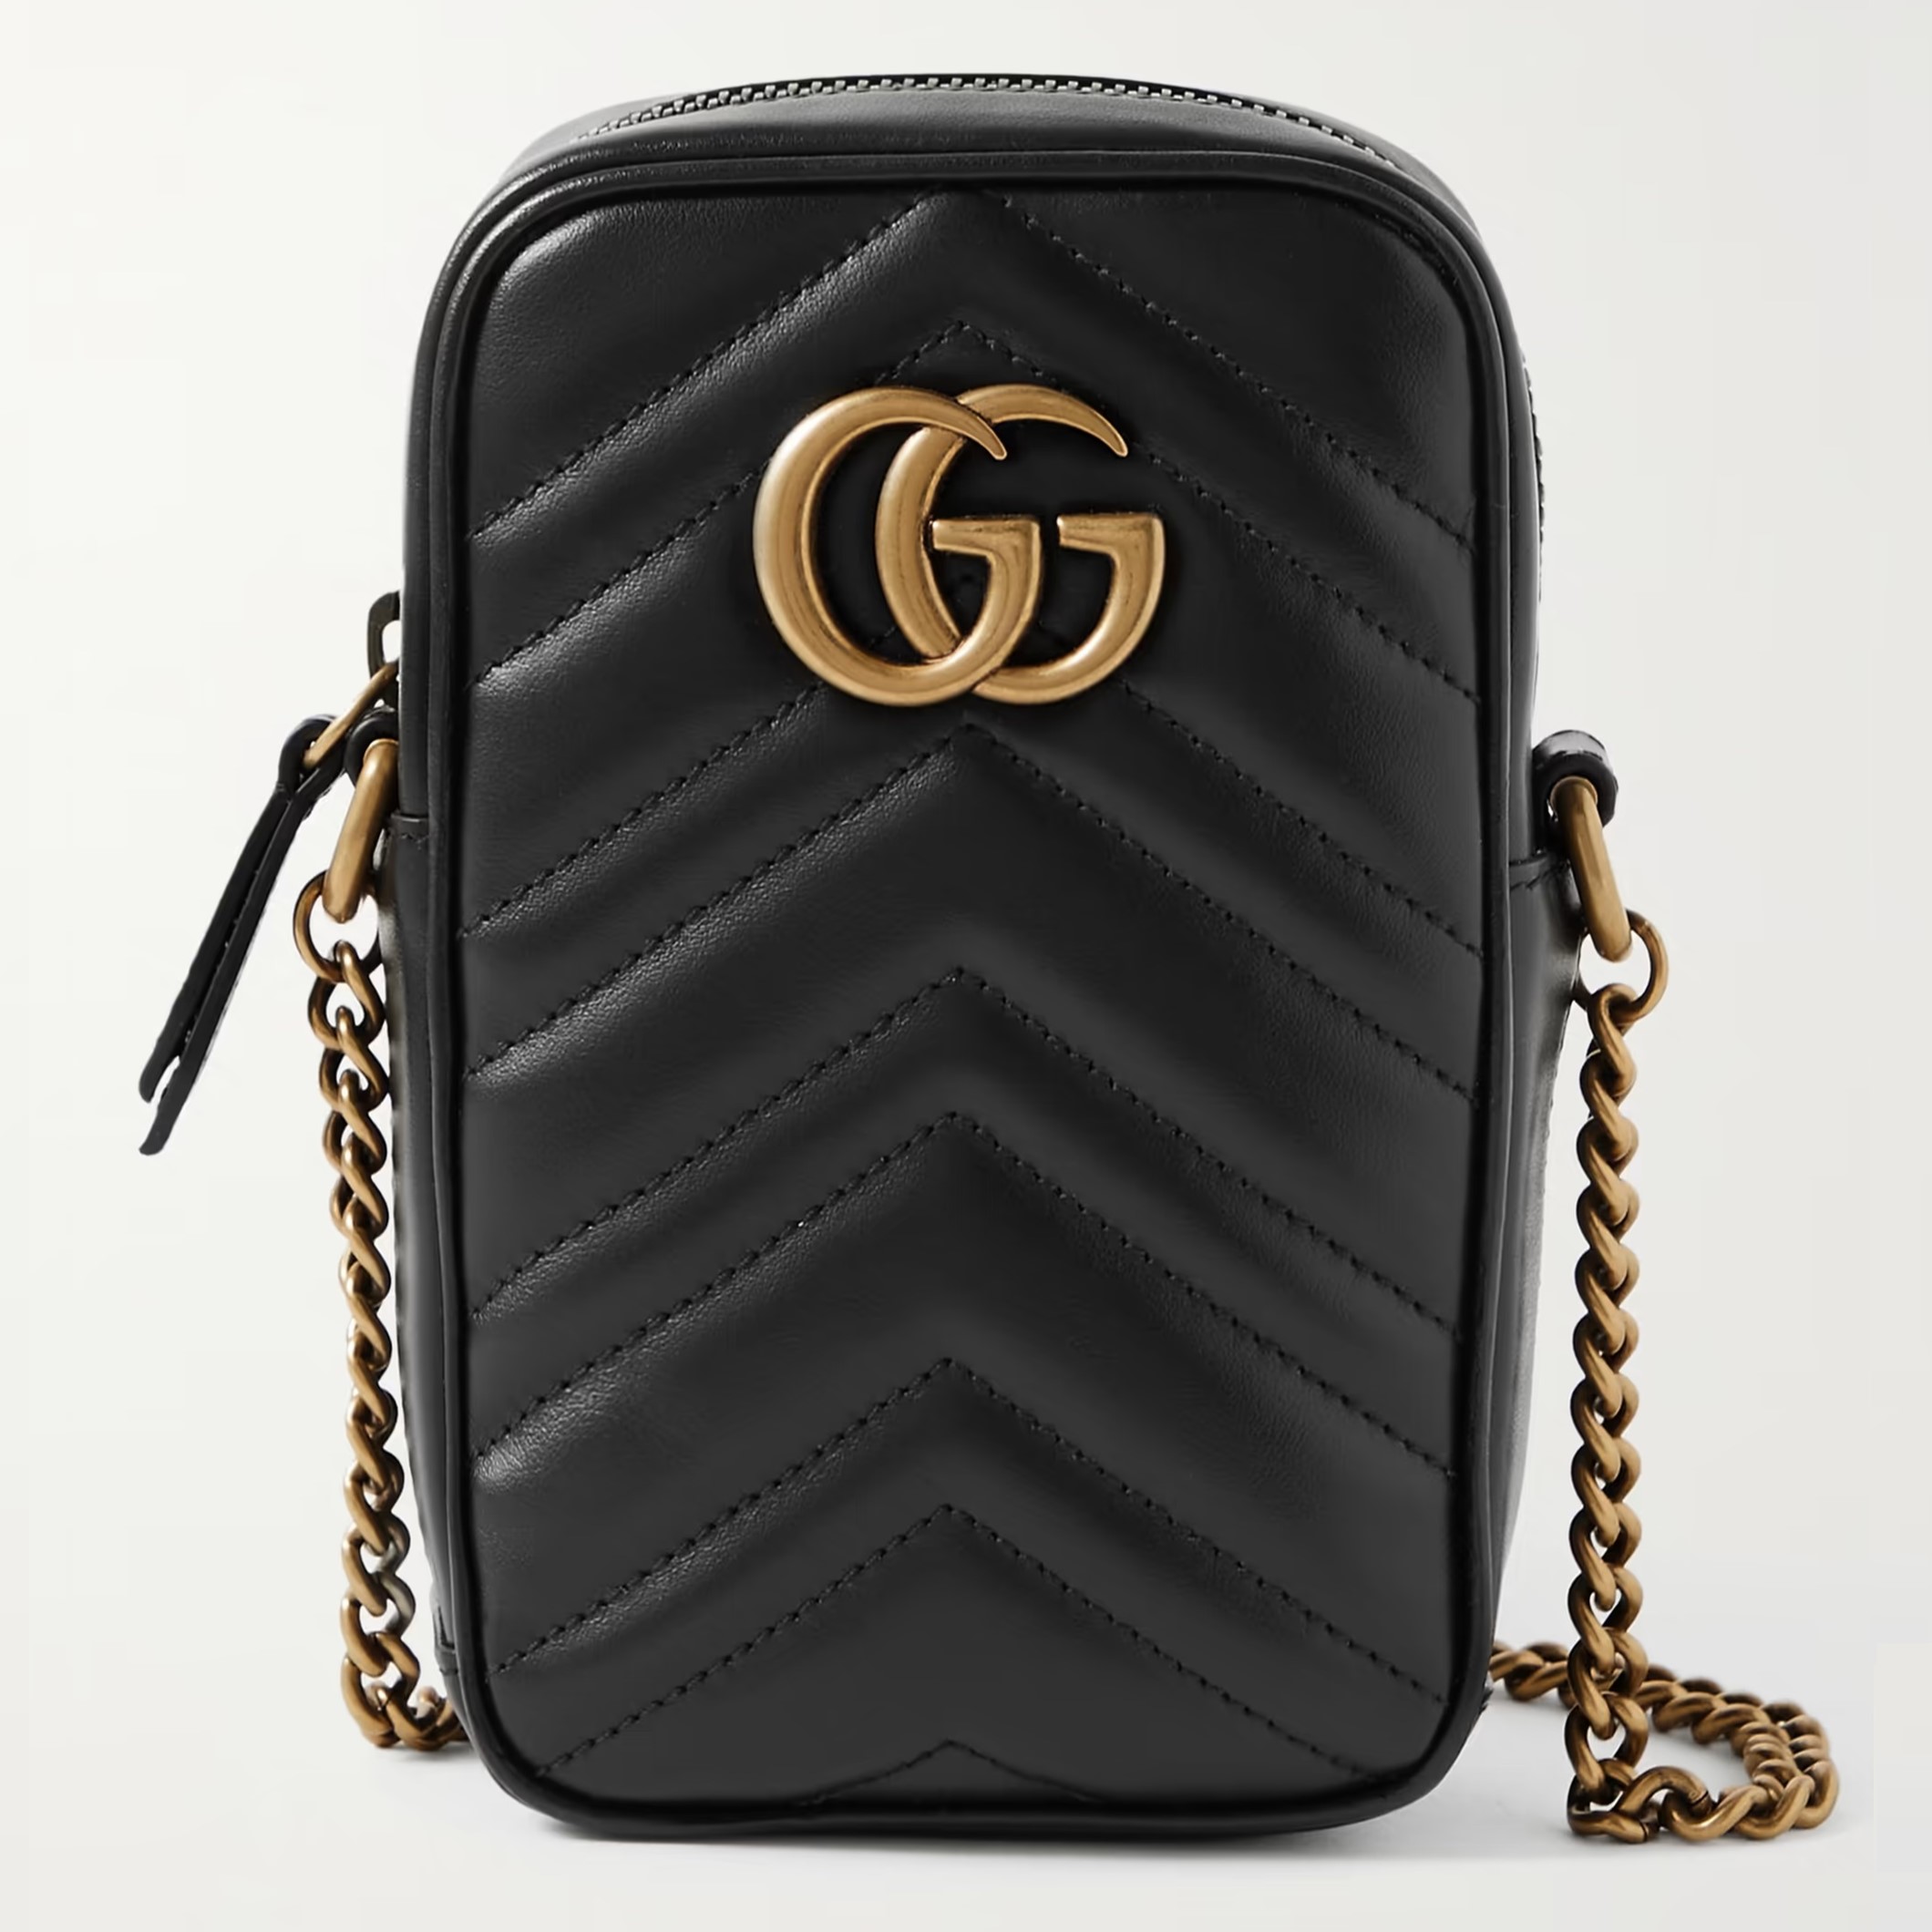 TÚI ĐEO ĐIỆN THOẠI GUCCI GG MARMONT MINI BLACK QUILTED LEATHER POUCH 4